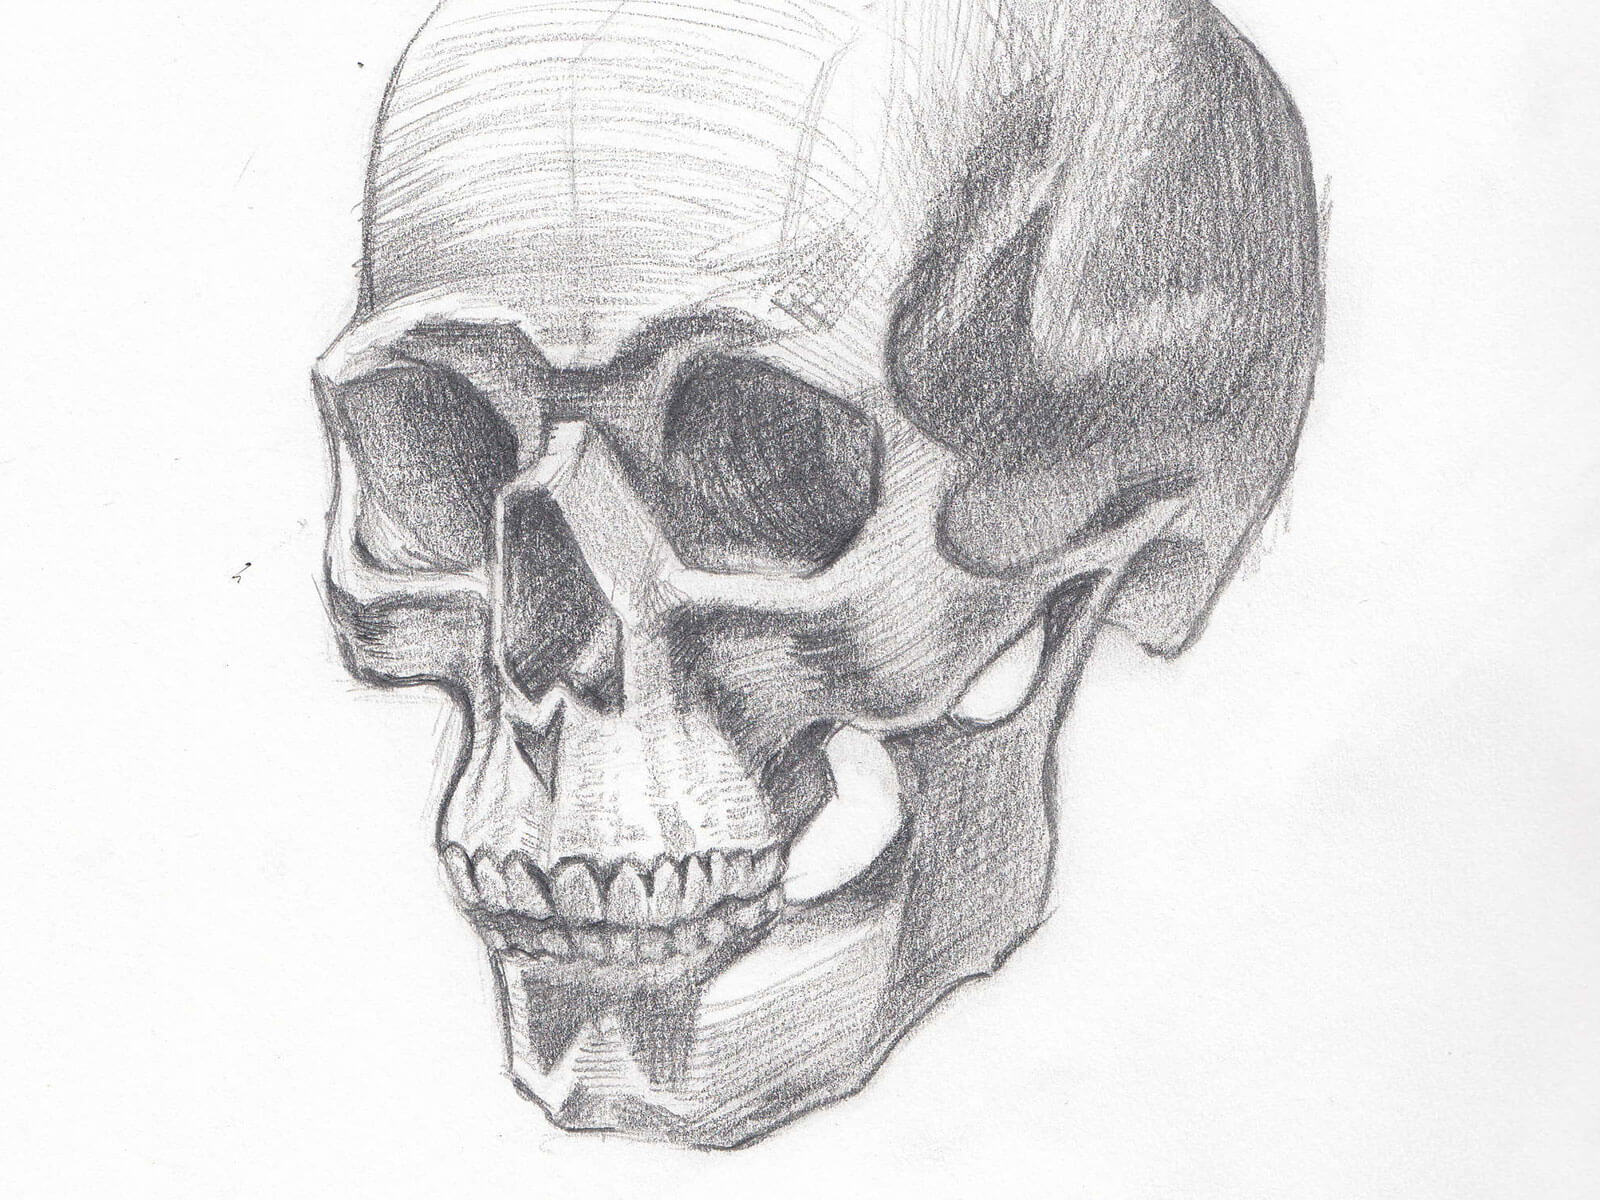 A black-and-white sketch of an unadorned human skull.